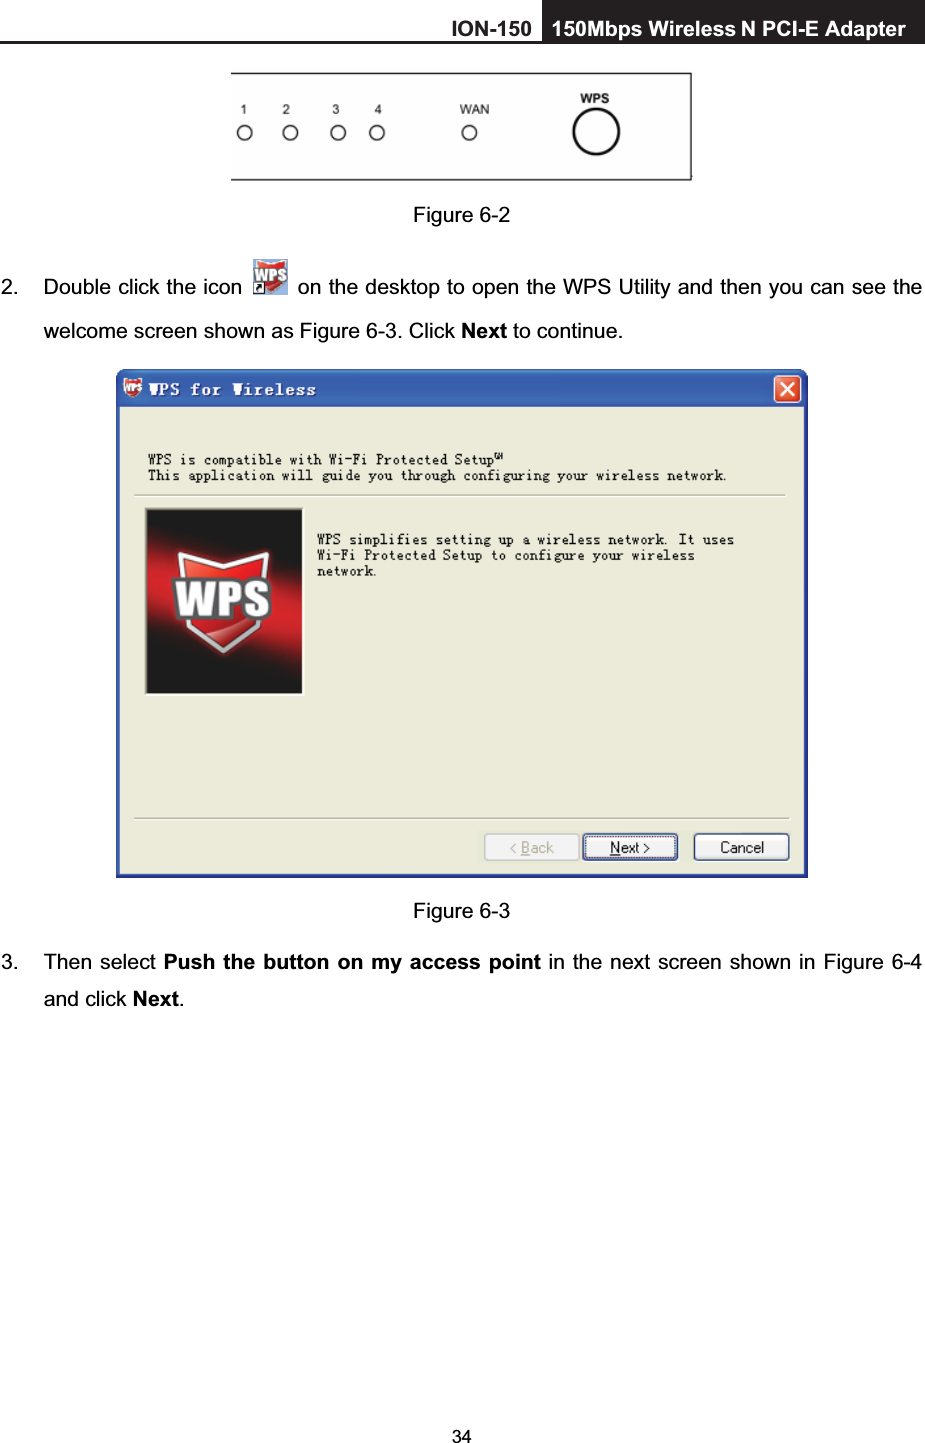 34Figure 6-2 2.  Double click the icon    on the desktop to open the WPS Utility and then you can see the welcome screen shown as Figure 6-3. Click Next to continue.   Figure 6-3 3. Then select Push the button on my access point in the next screen shown in Figure 6-4and click Next.ION-150 150Mbps Wireless  N PCI-E Adapter